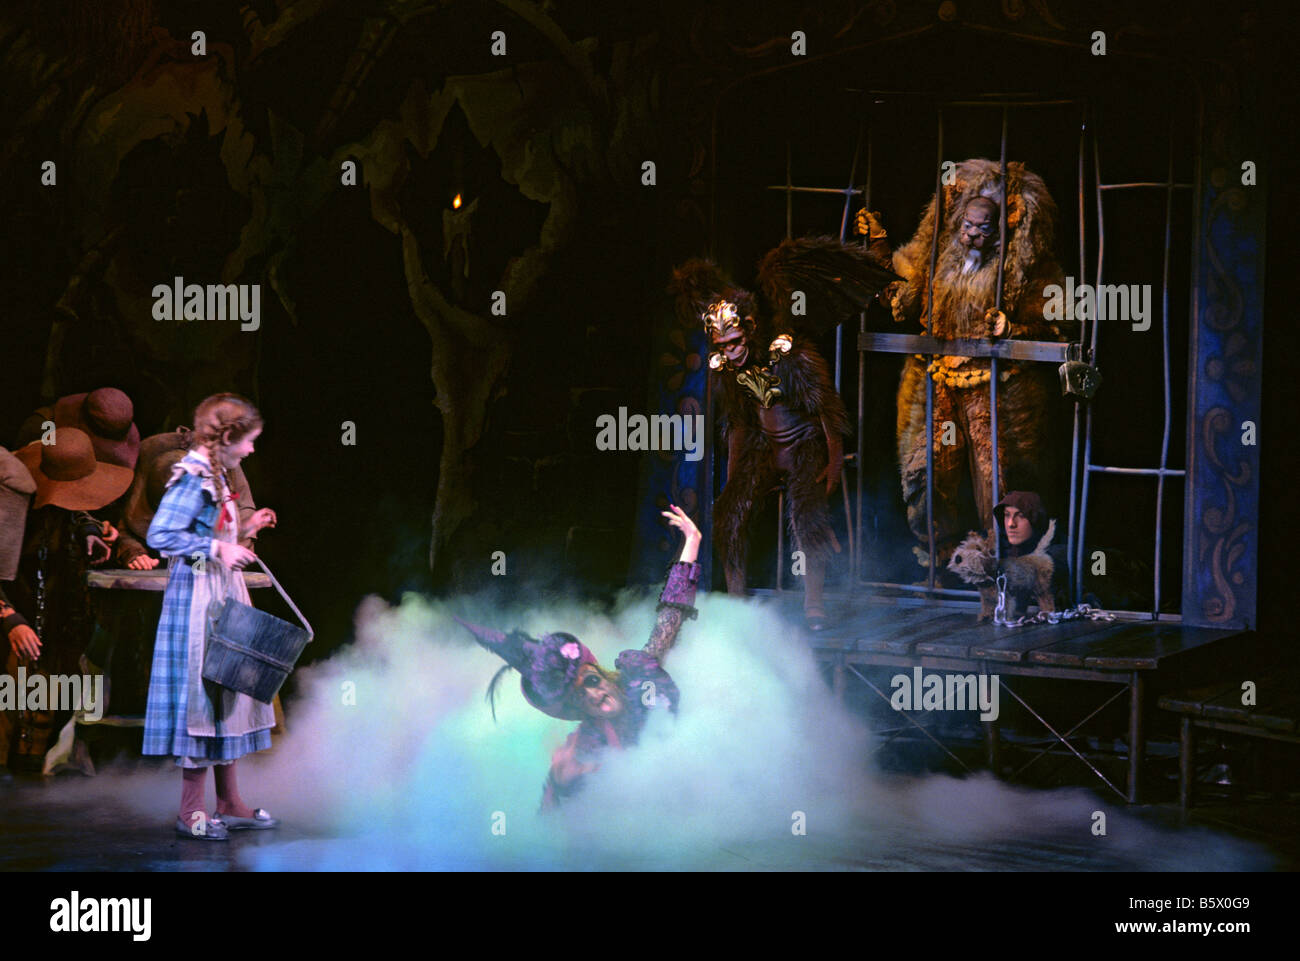 http://c8.alamy.com/comp/B5X0G9/the-wicked-witch-melts-in-production-of-the-wonderful-wizard-of-oz-B5X0G9.jpg